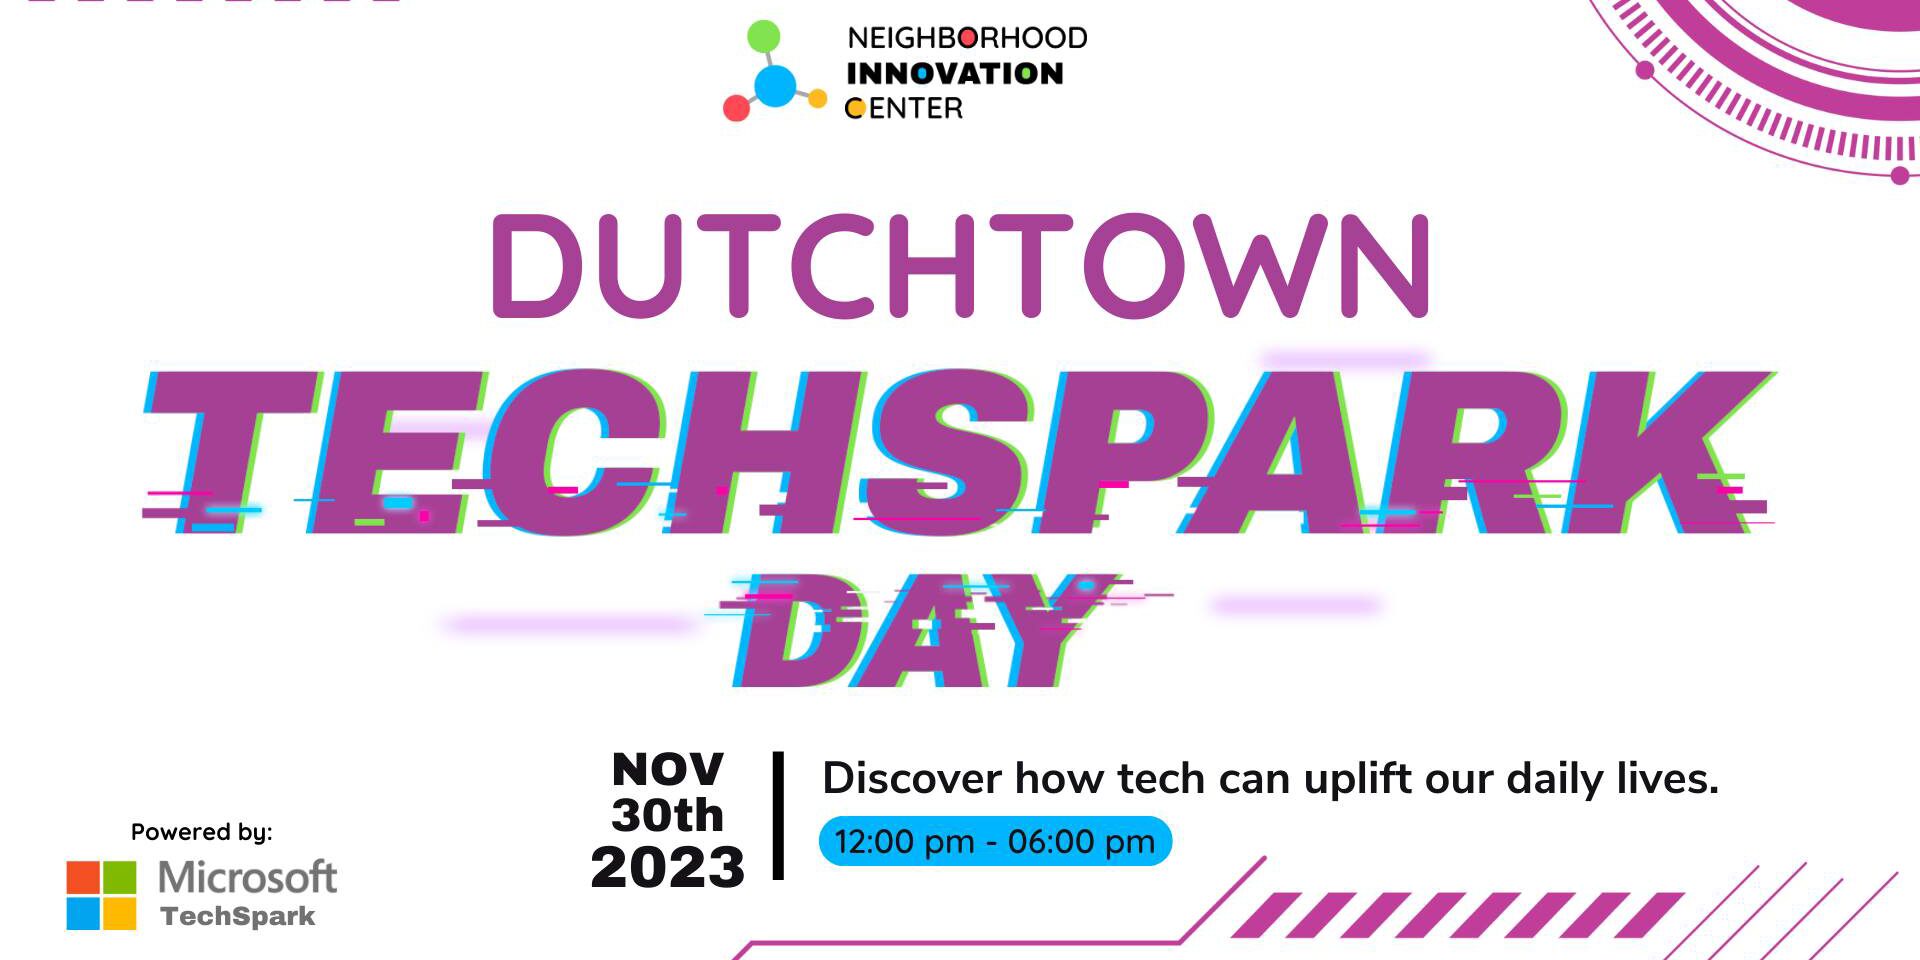 Dutchtown TechSpark Day: Discover how technology can uplift our daily lives.